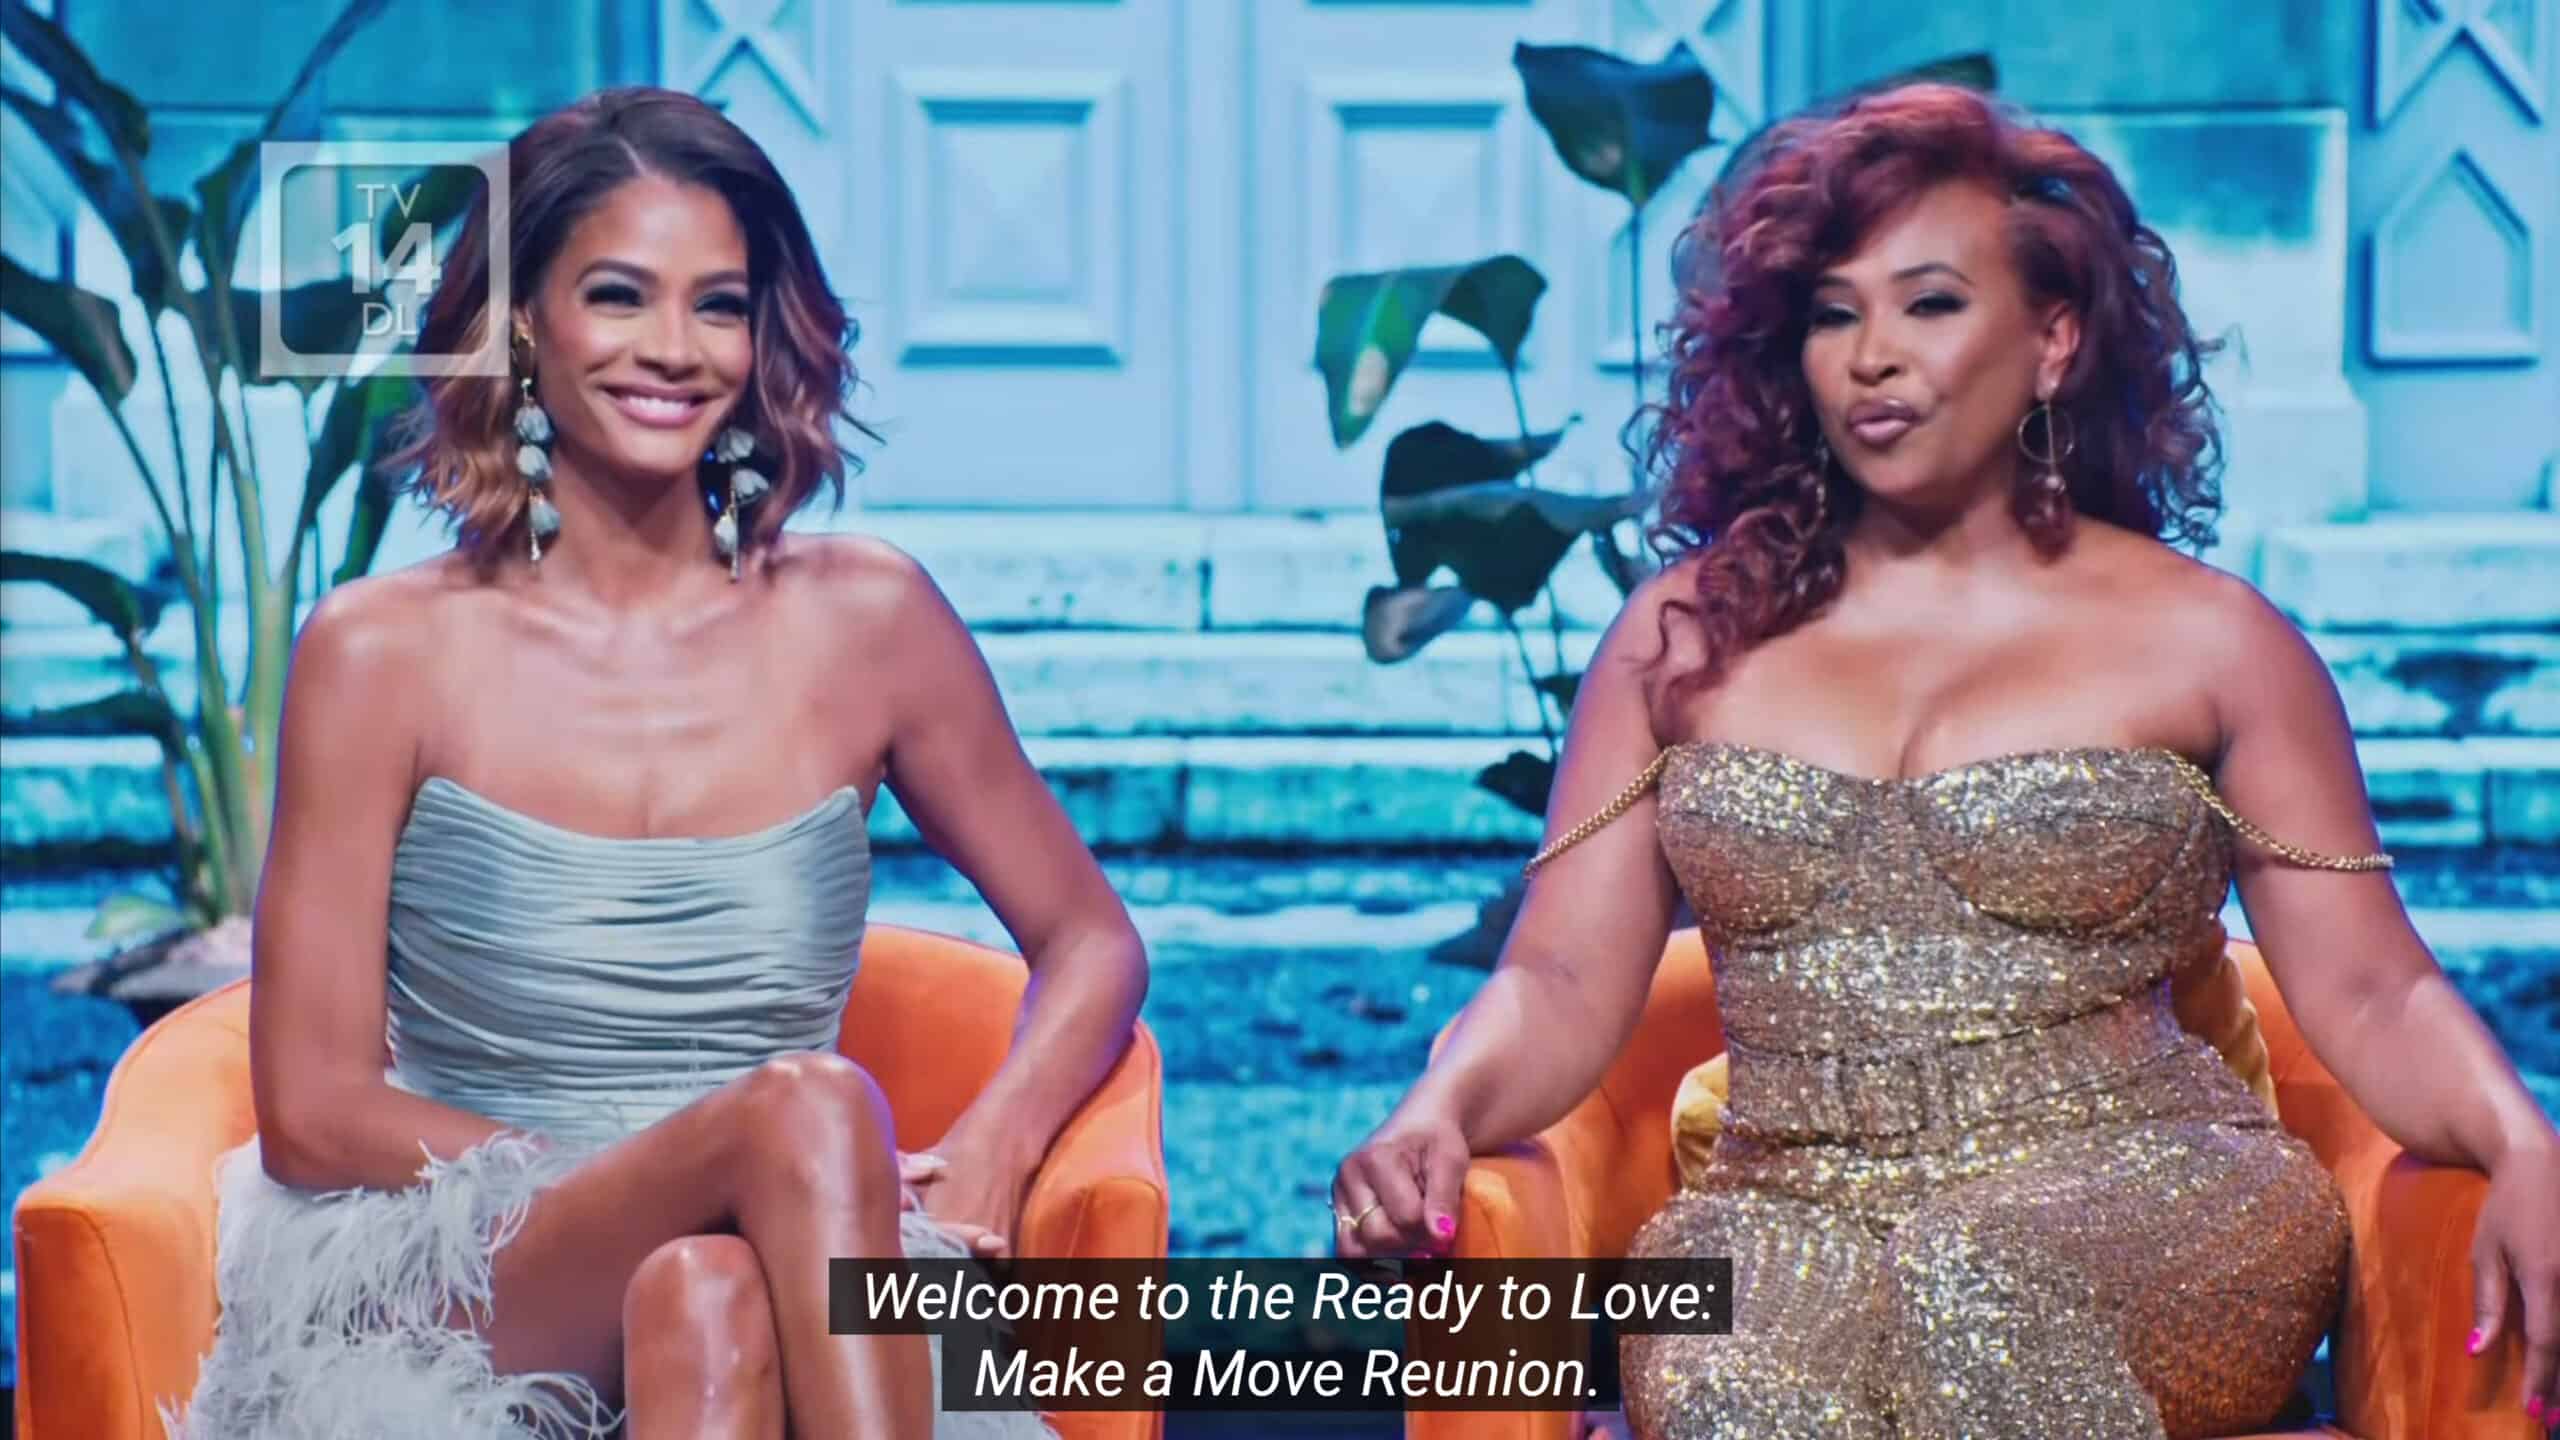 Tamica and Tanika welcoming people to the reunion show